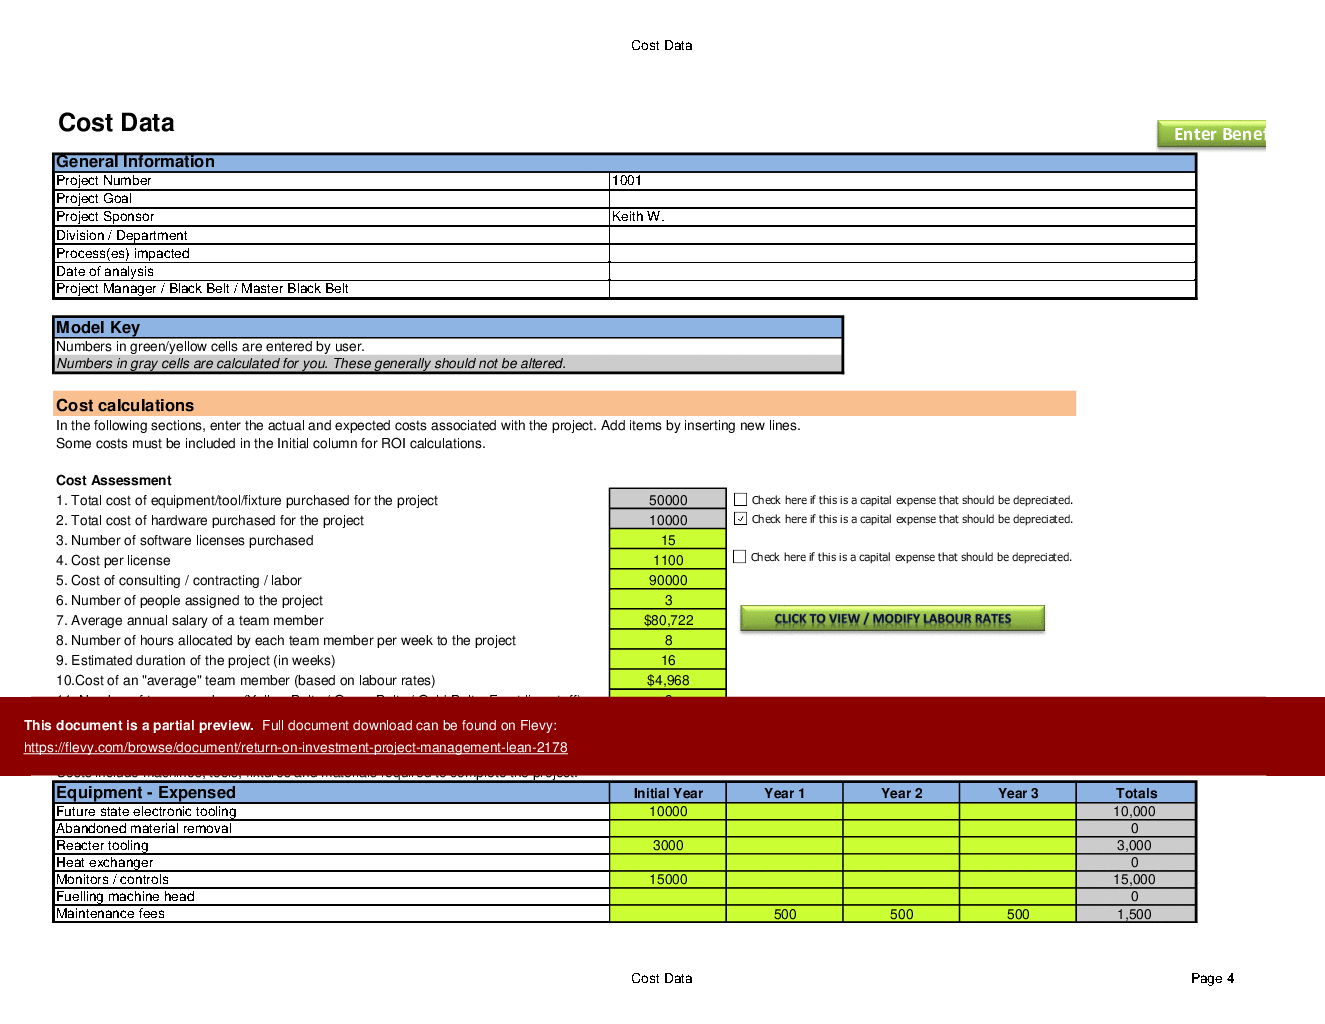 This is a partial preview of Return on Investment (Project Management/Lean) (Excel workbook (XLSX)). 